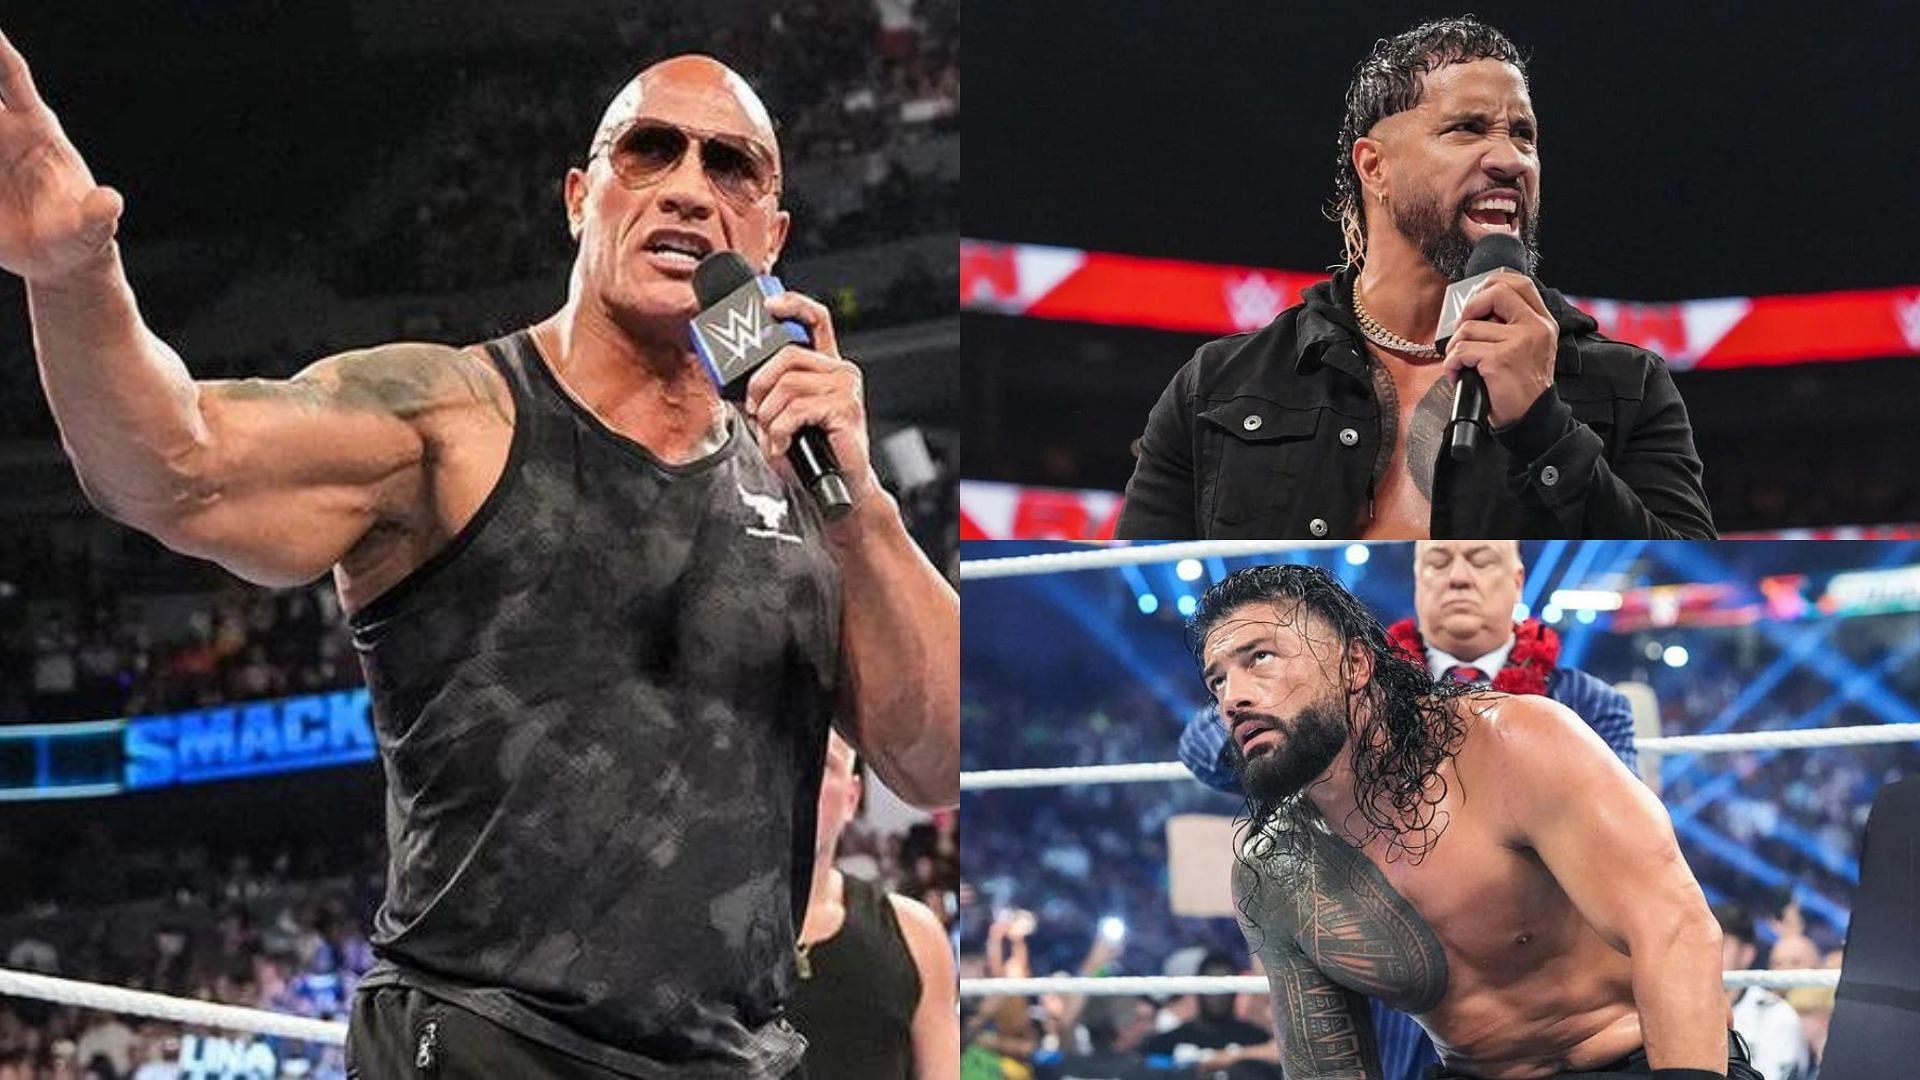 "Team Rock vs. Team Reigns" - WWE Universe wants The Rock to join forces with Jey Uso after his return